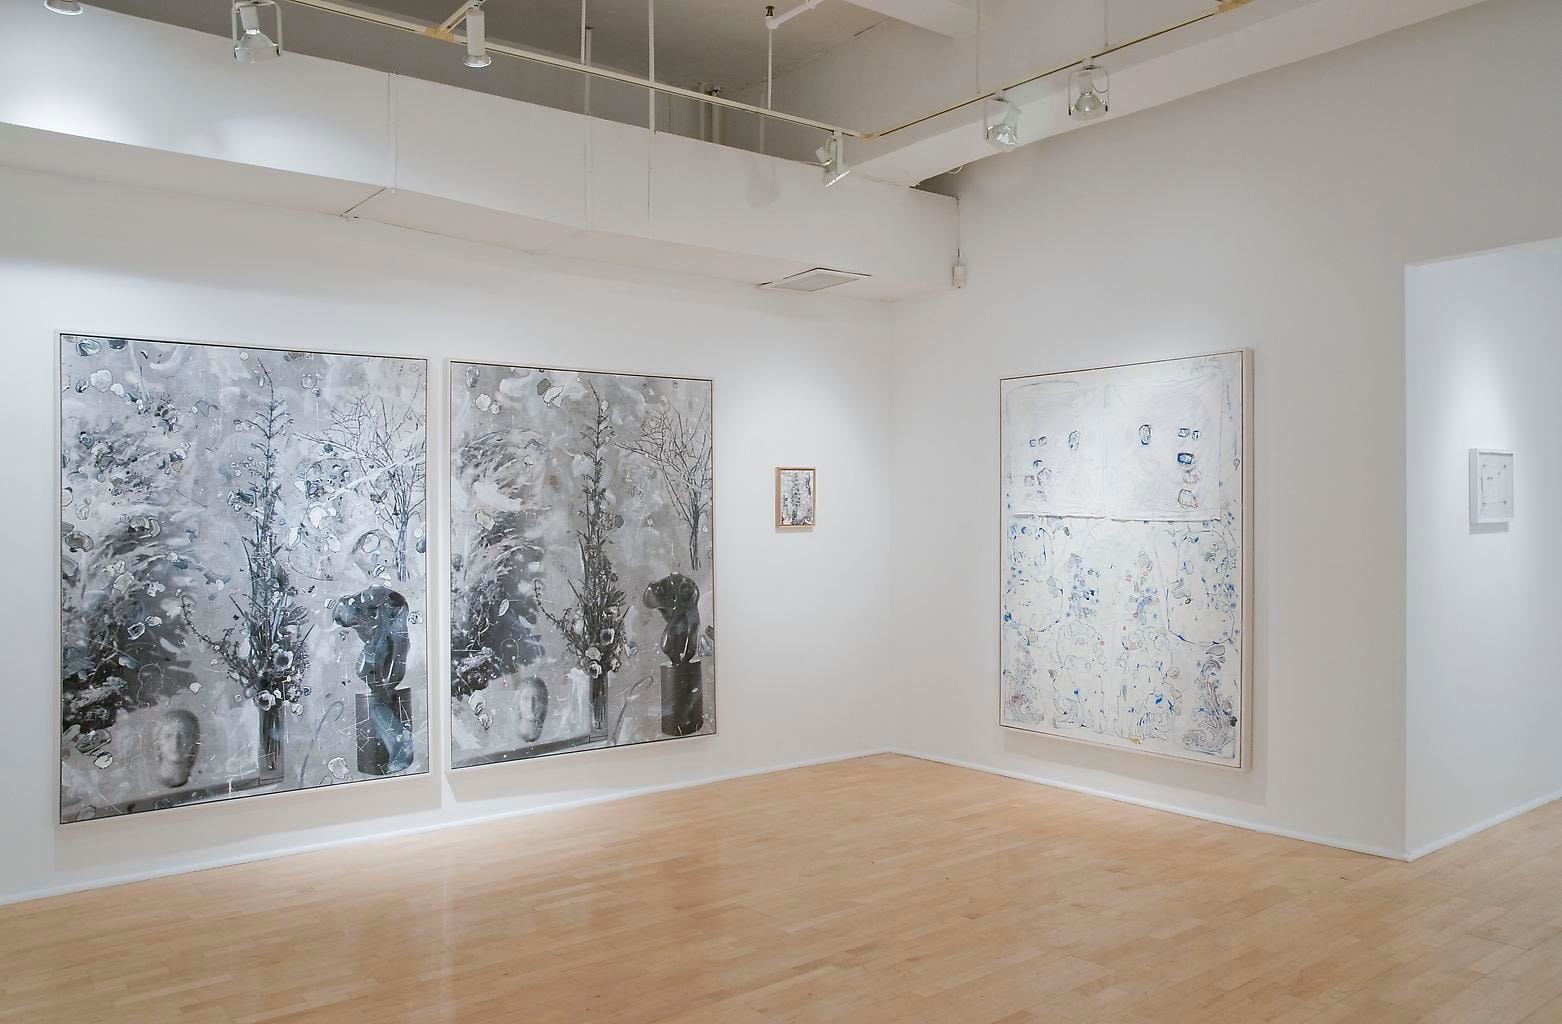  Installation view, Carter, Some Feelings, 1984, 1970, Marc Jancou, New York, May 11 - June 29, 2013